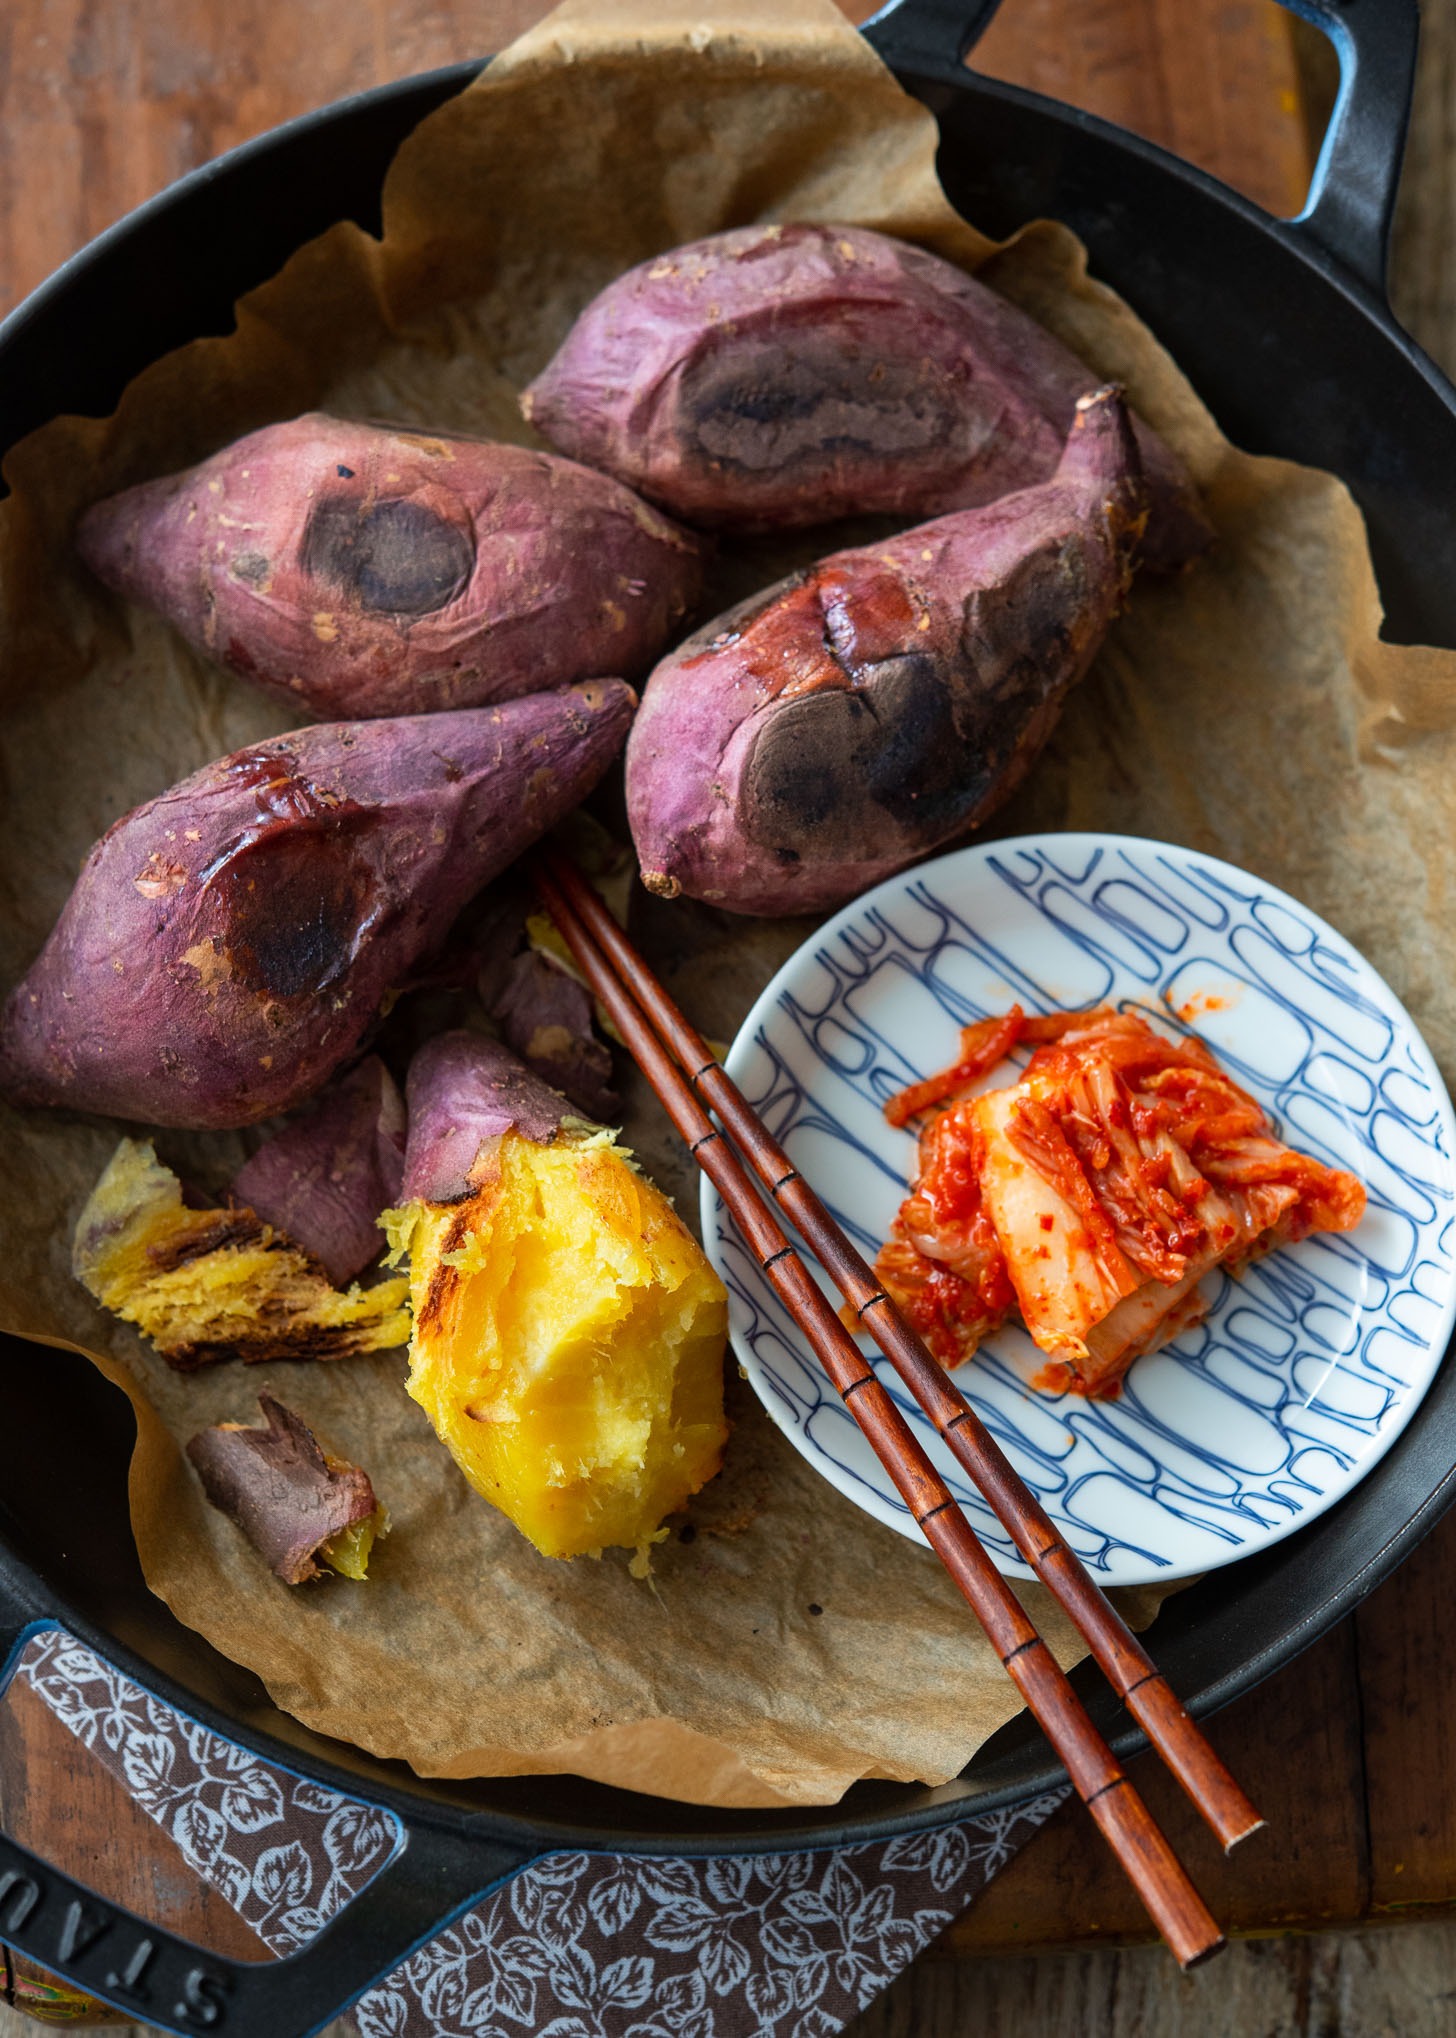 Roasted Korean sweet potato is served with kimchi.